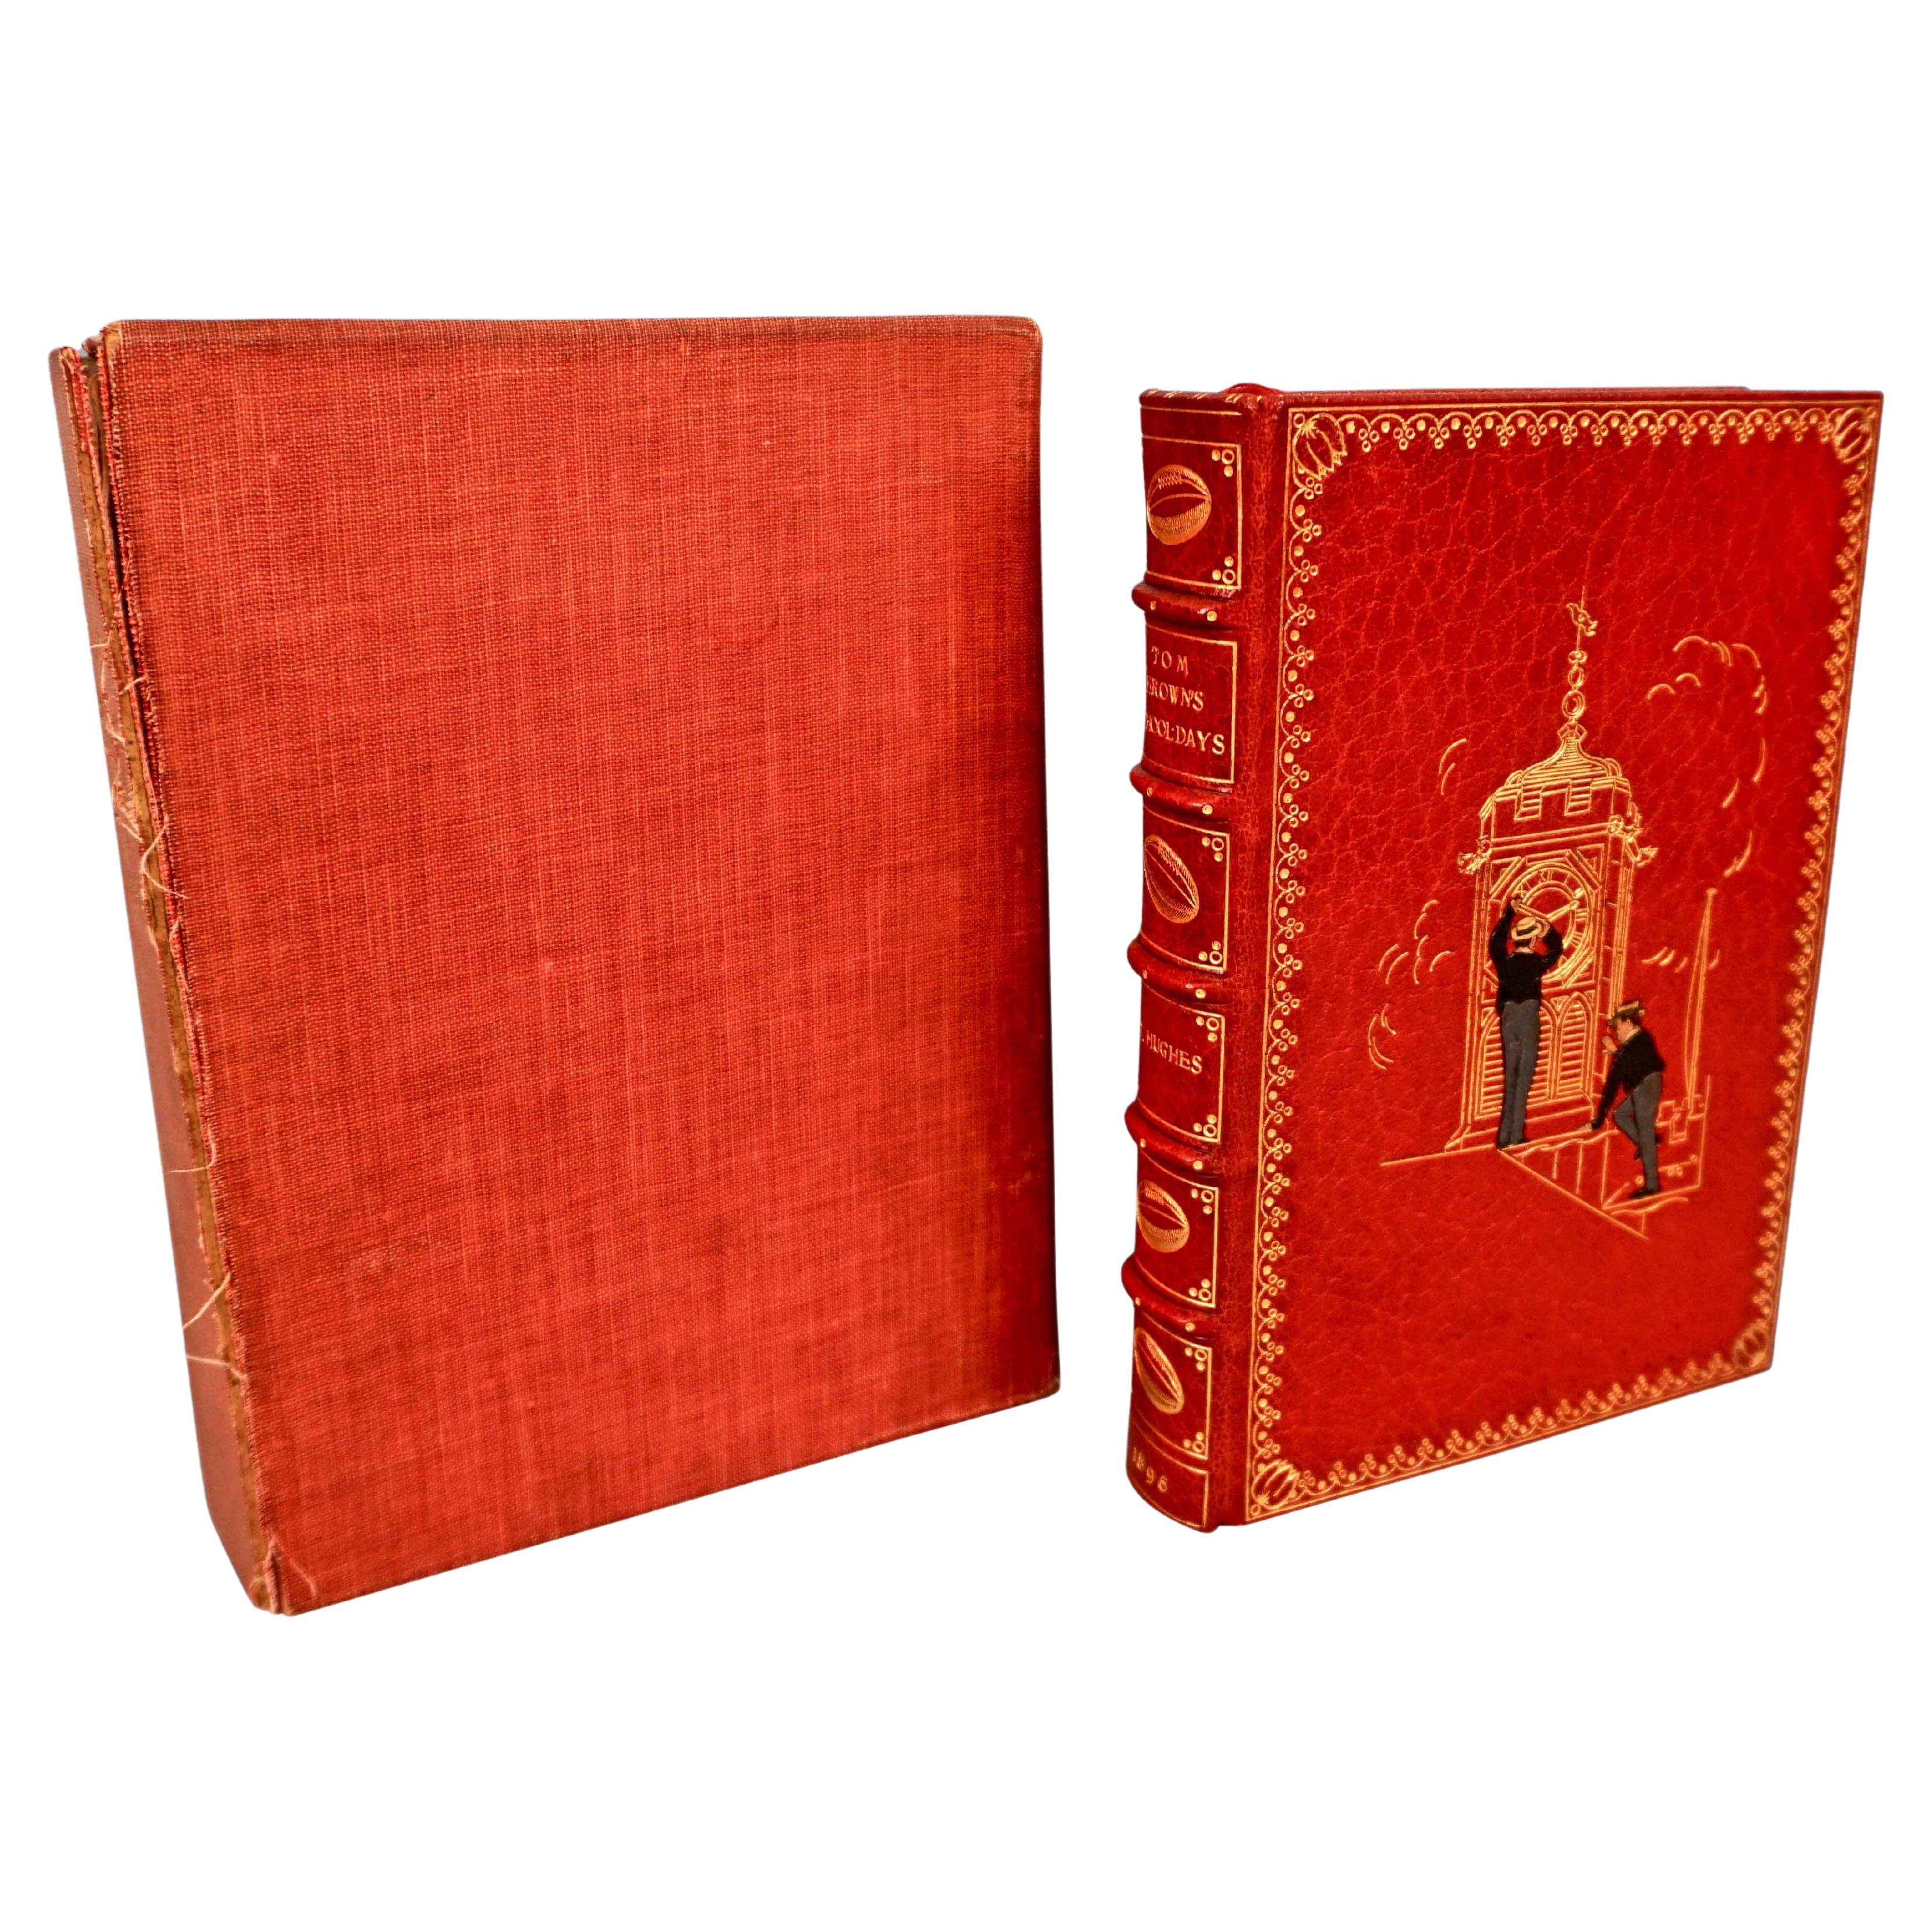 A magnificently bound edition of Tom Brown's School Days published in London in 1896 by Macmillan and Company with full gilt edges. The binding was created and is signed by Kelly & Sons London, an important custom bindery in London founded in 1770